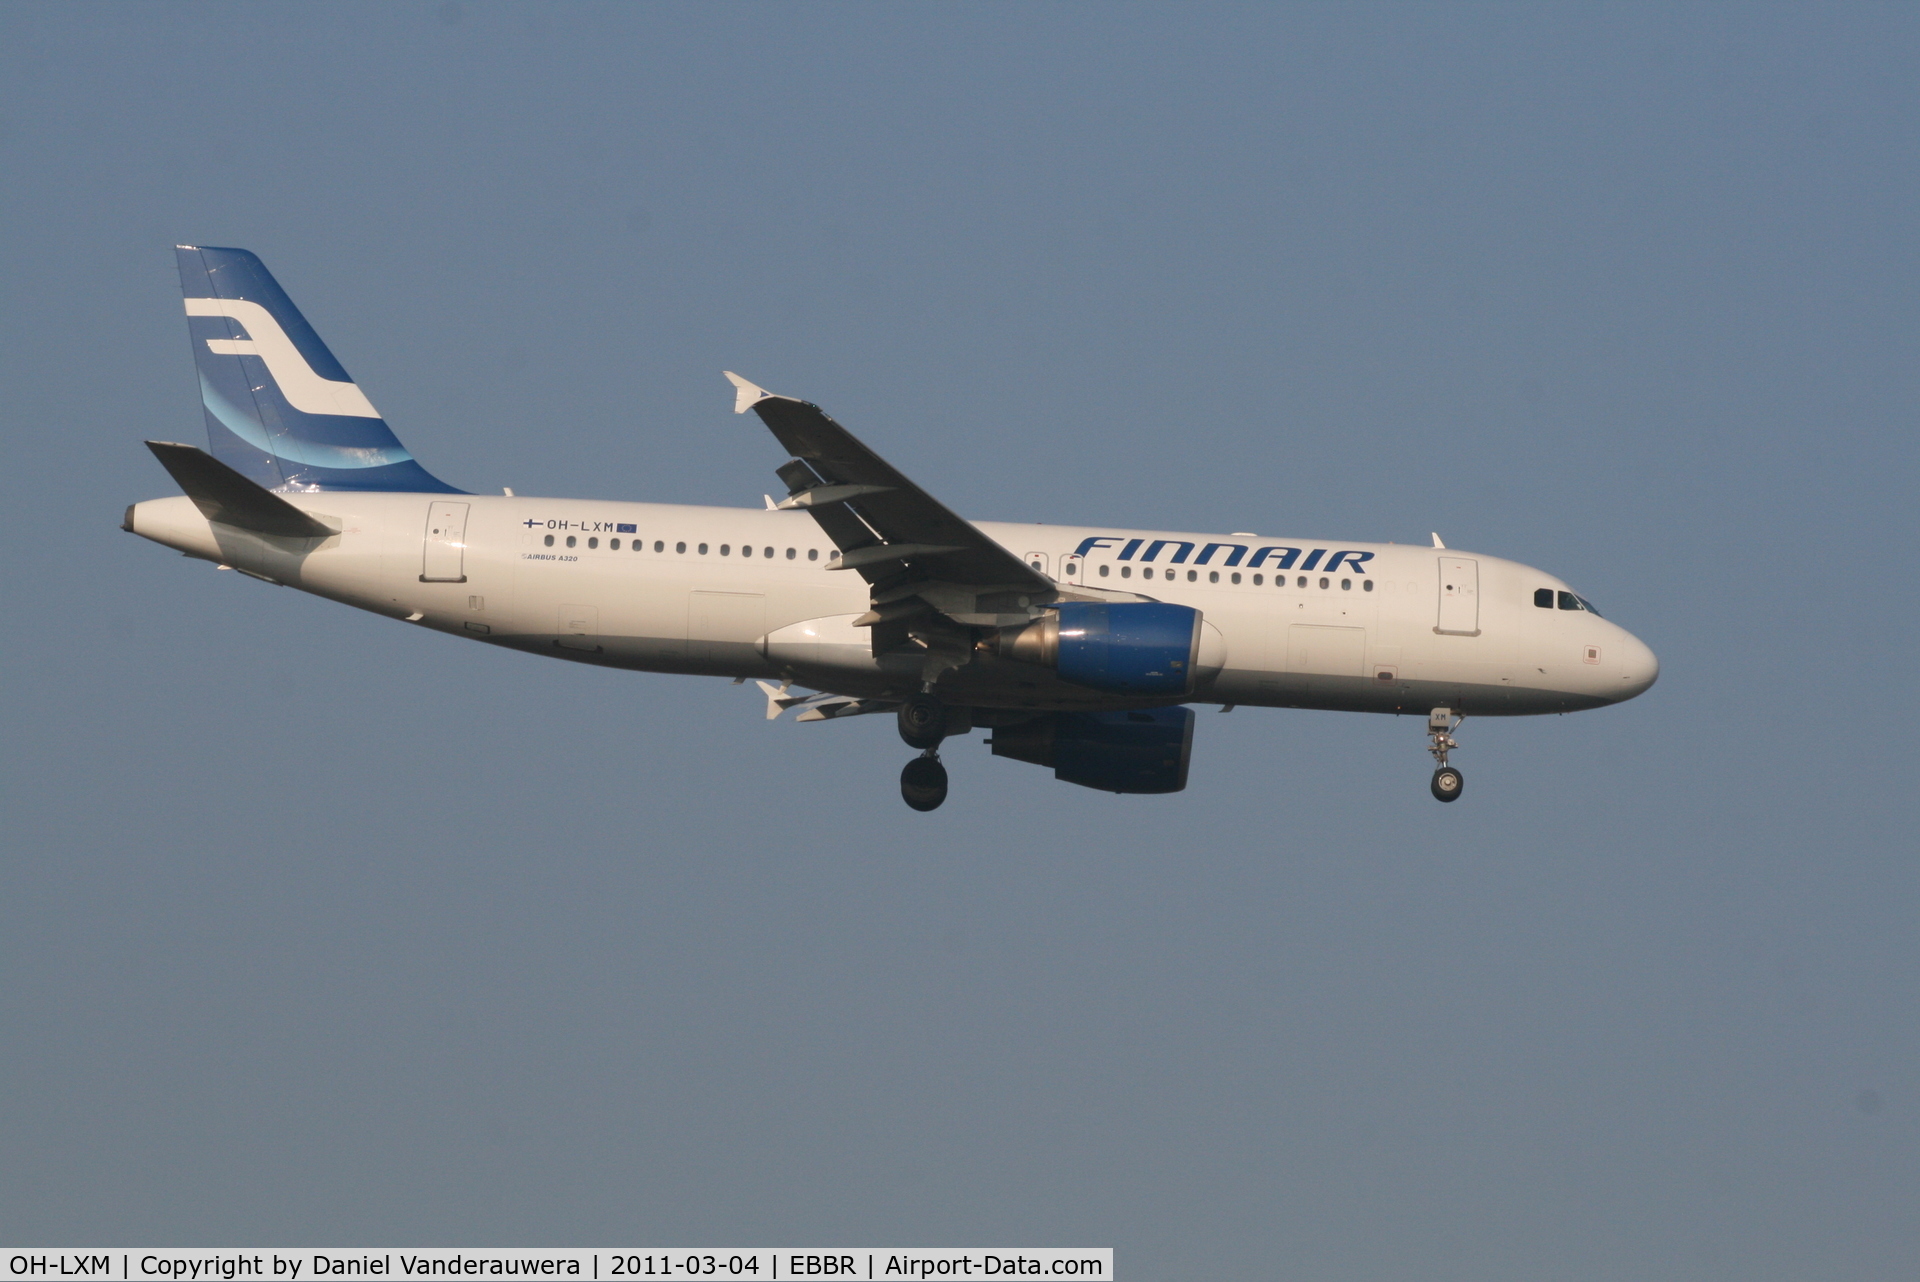 OH-LXM, 2003 Airbus A320-214 C/N 2154, Arrival of flight AY811 to RWY 02